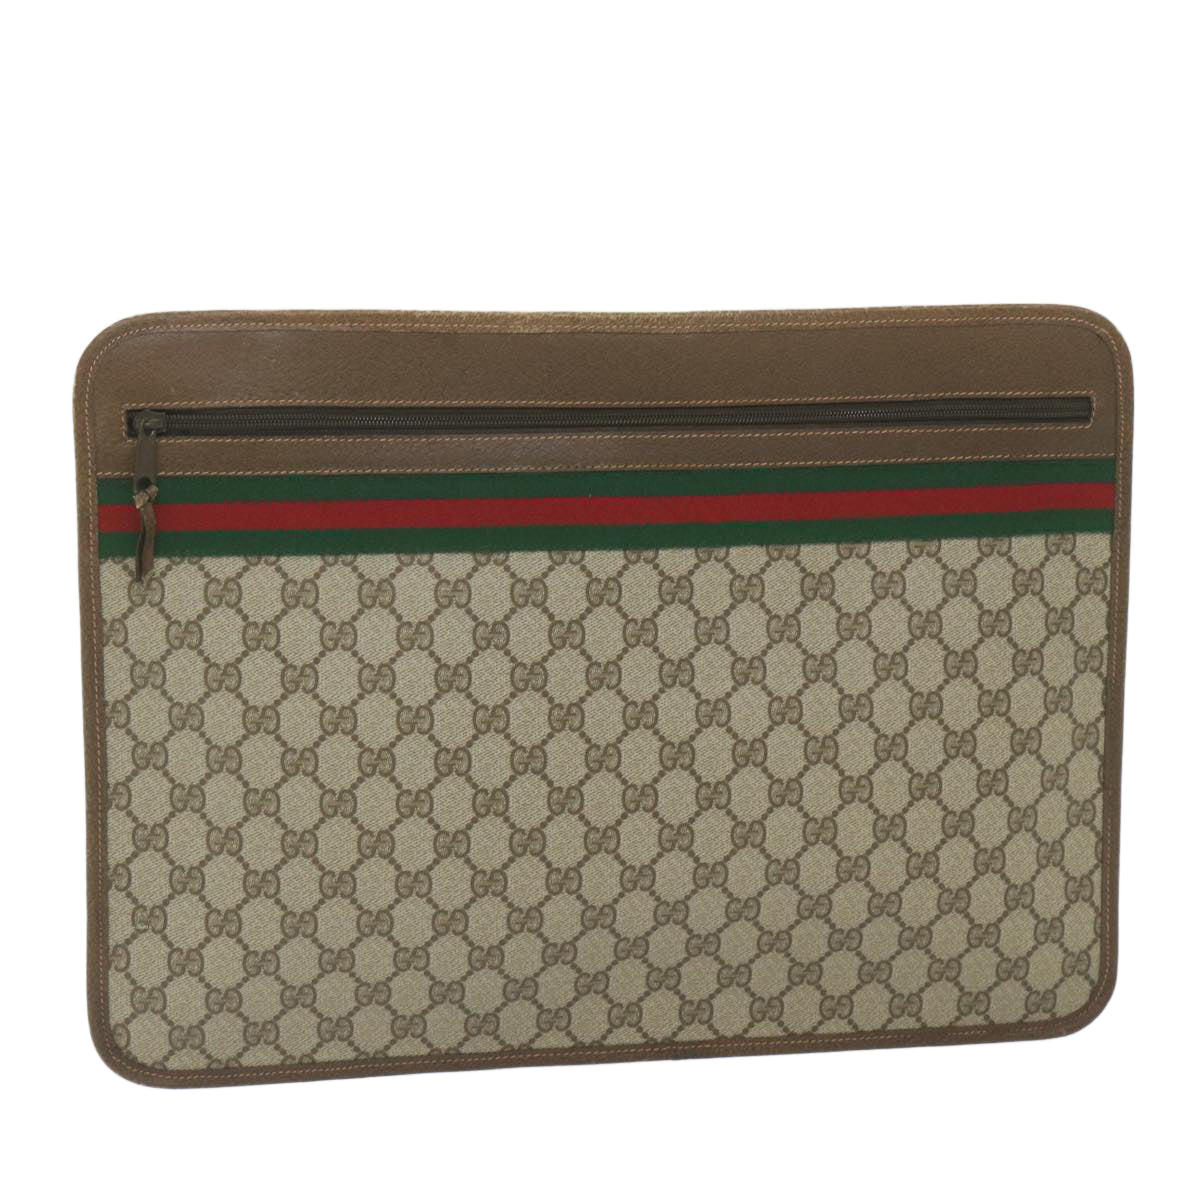 GUCCI GG Supreme Web Sherry Line Briefcase Beige Red Green 89 02 060 Auth tb936